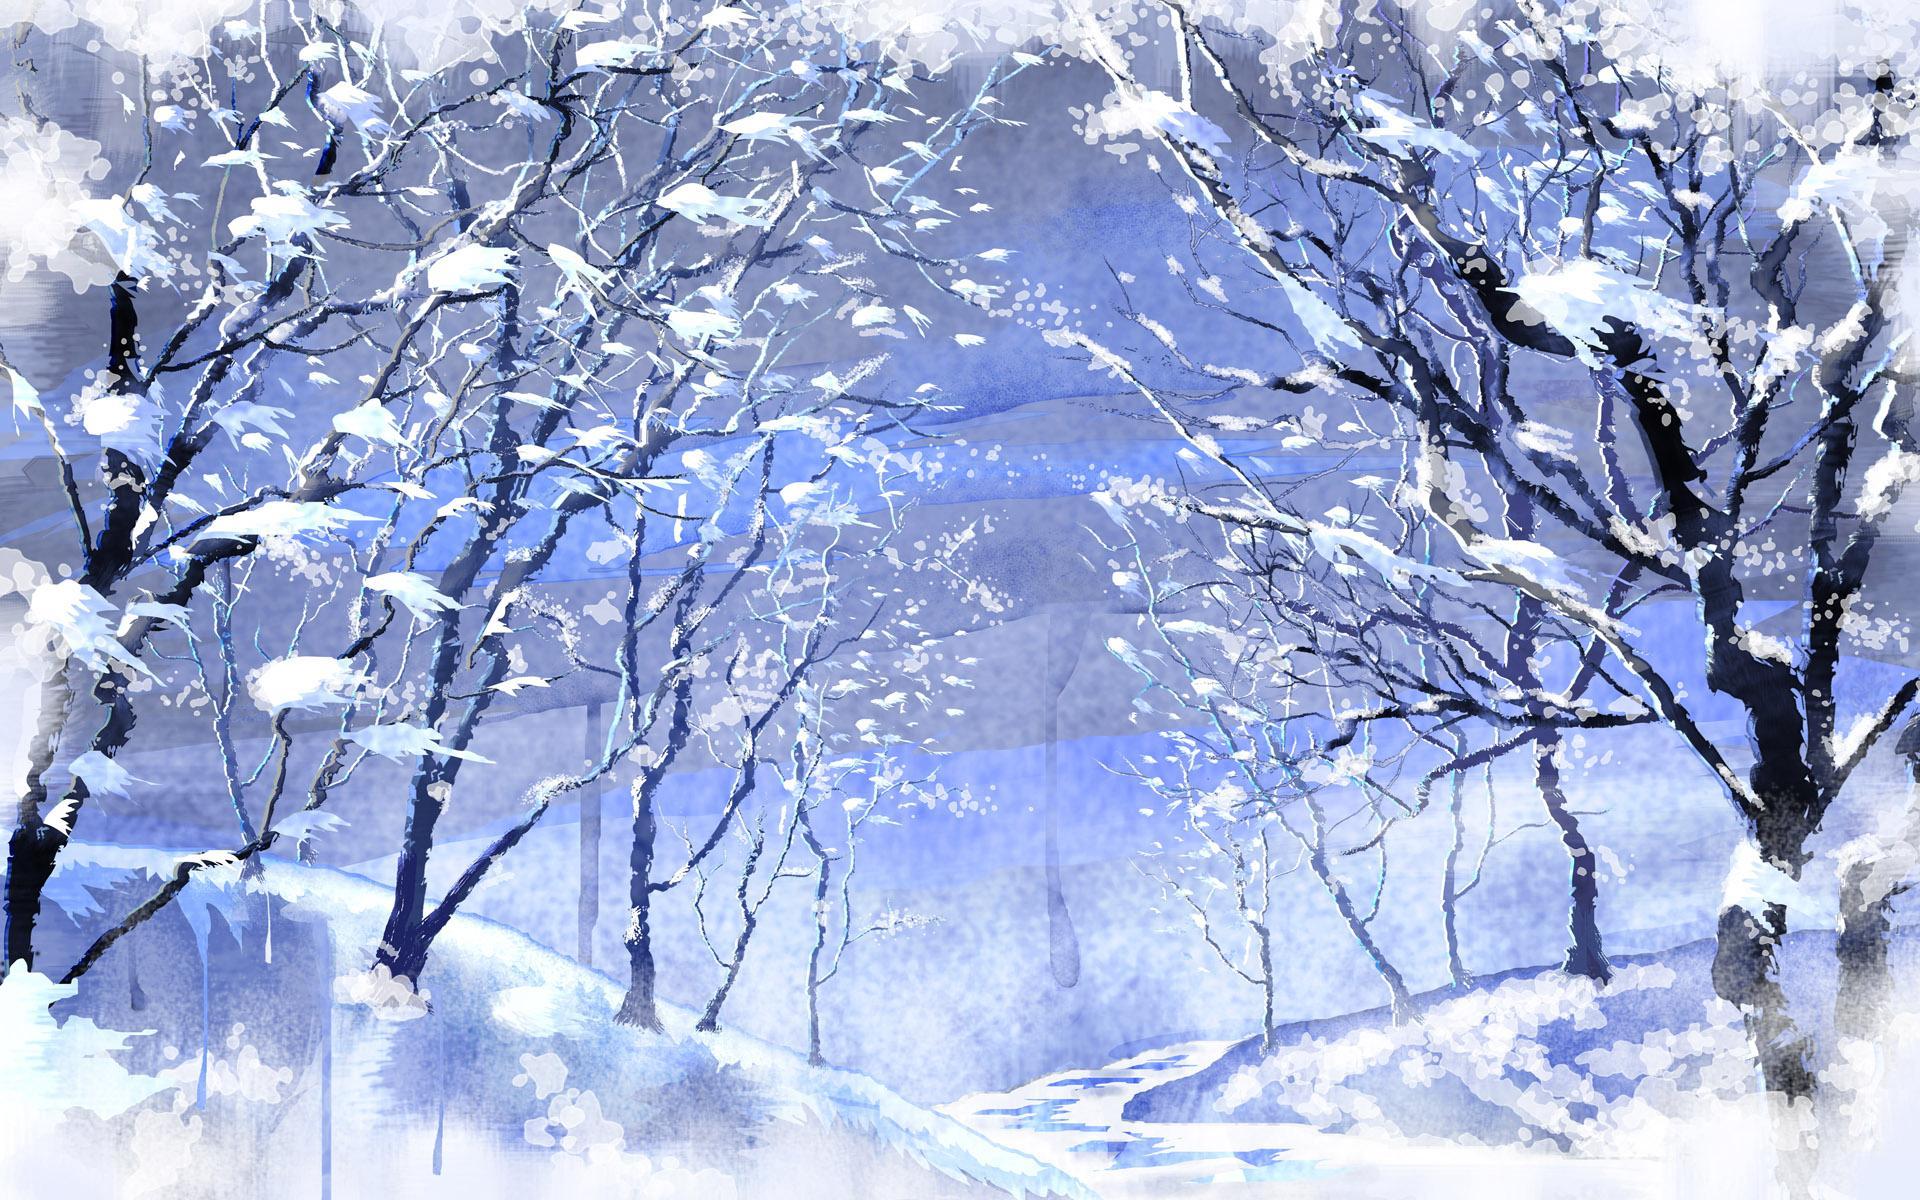 Snowy Day Live Wallpaper for Android   APK Download 1920x1200